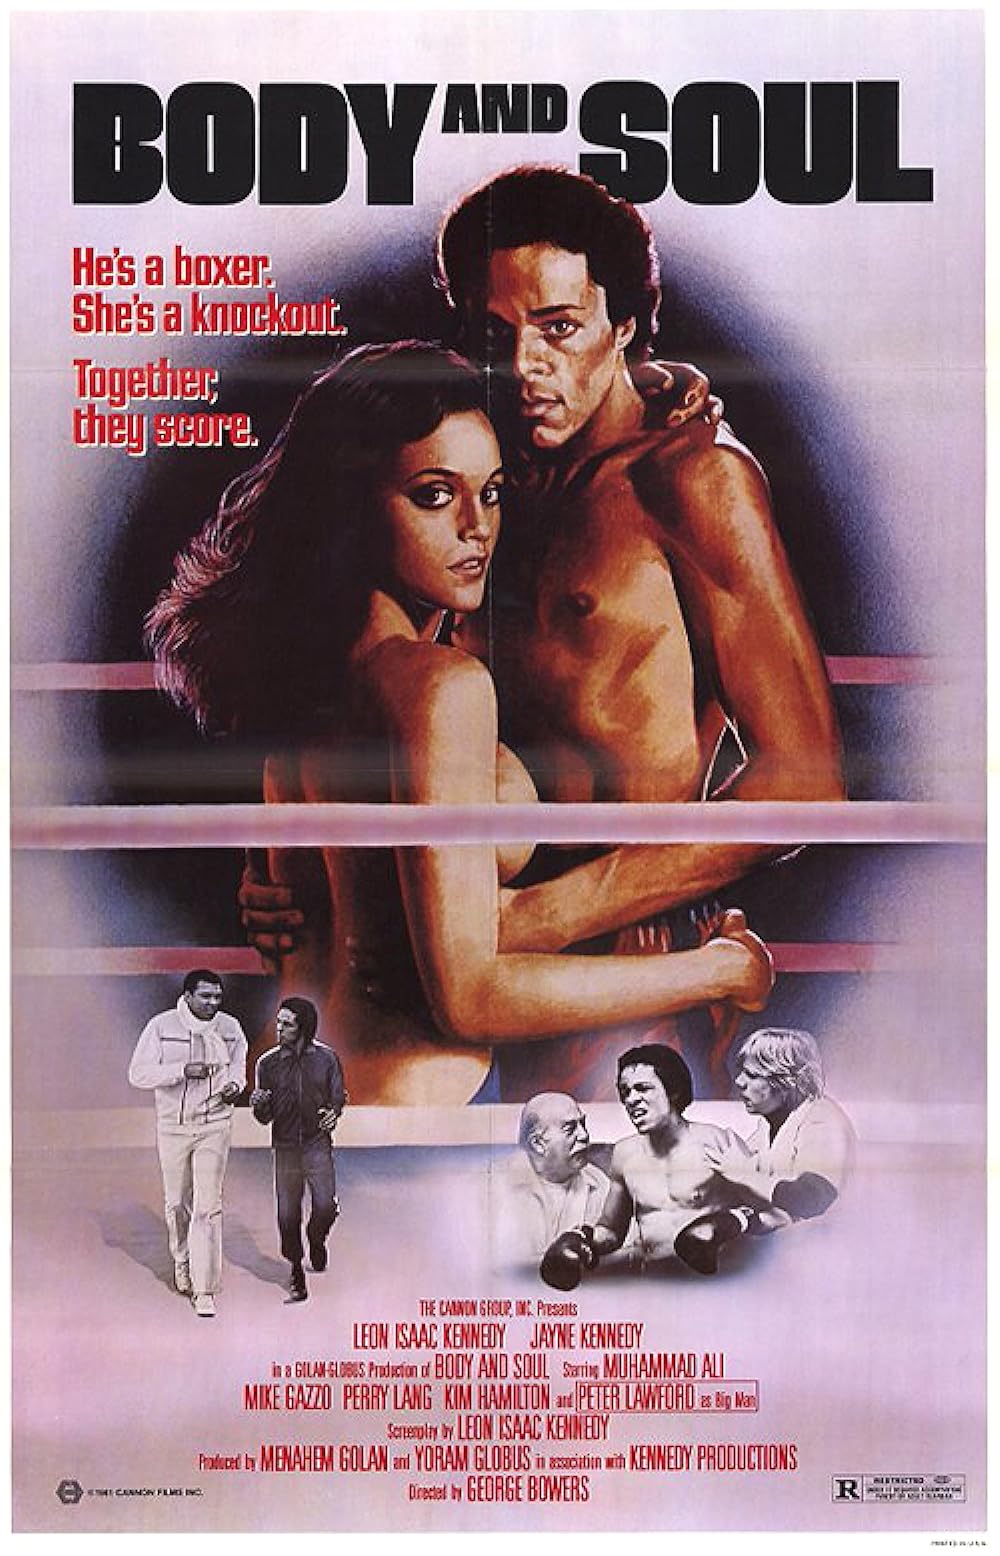 anne pooi recommends Jayne Kennedy Pussy